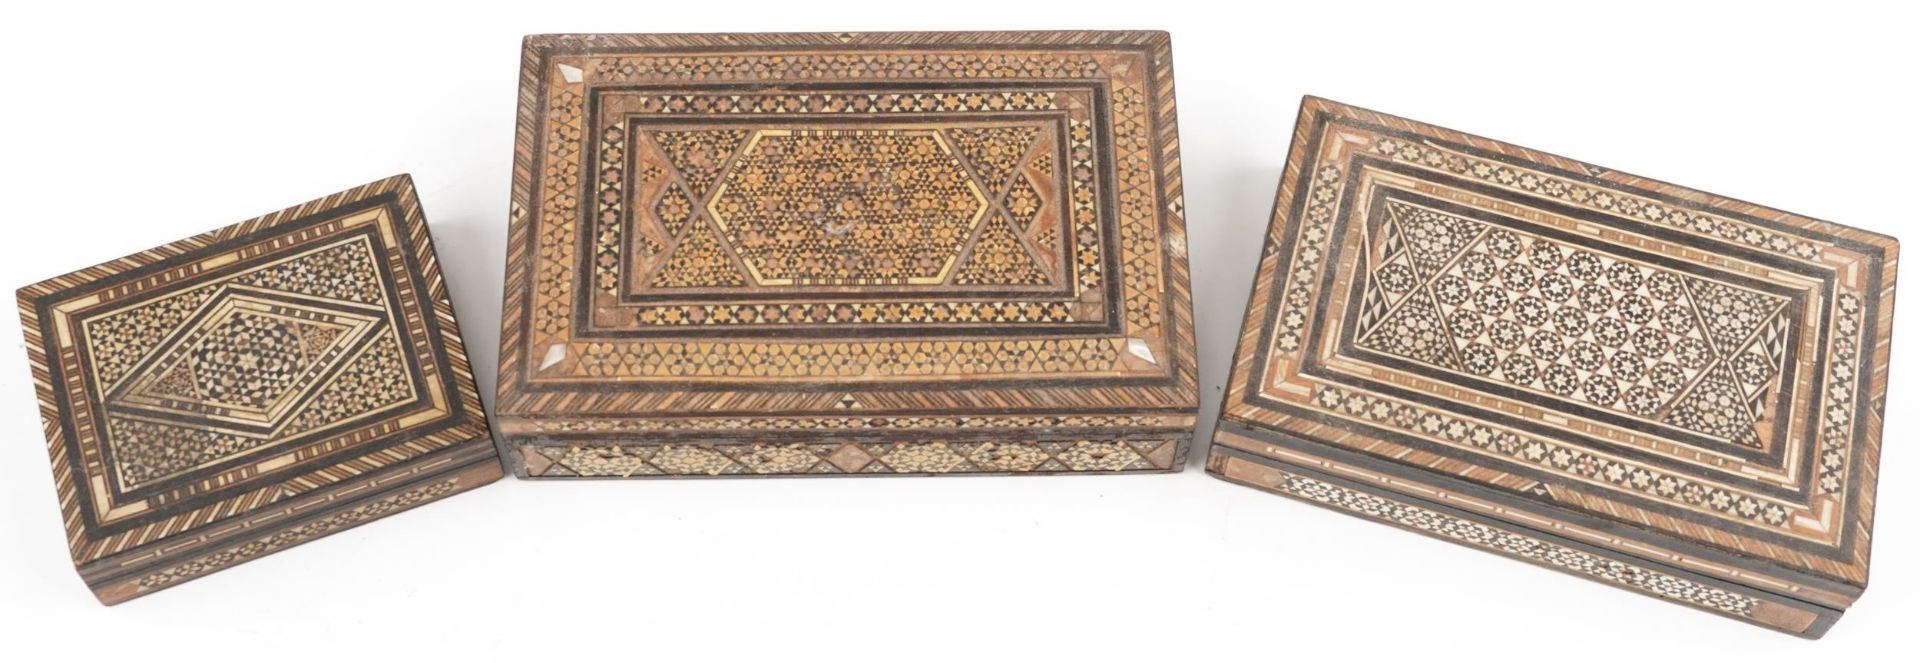 Three Syrian Moorish style rectangular inlaid wooden boxes, the largest 22cm wide - Image 2 of 4